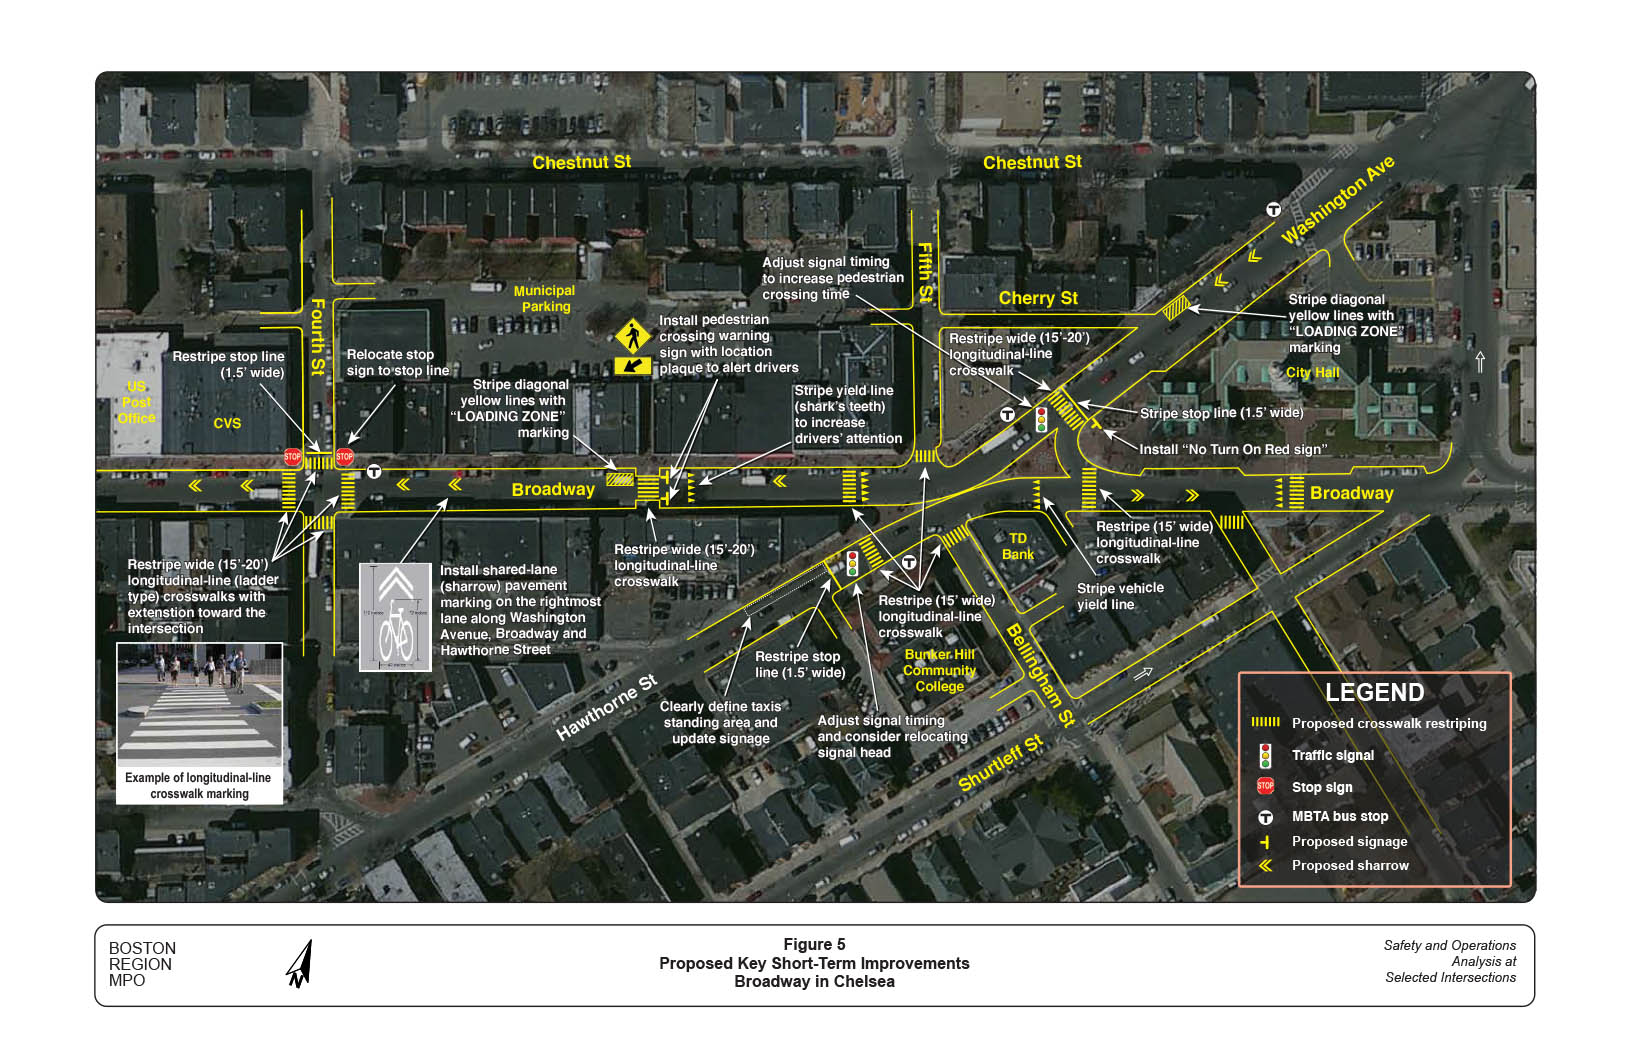 Figure 5 — Proposed Key Short-Term Improvements
Aerial view of study area with computer-drawn superimposed street and traffic map, including notations about improvements, and indicating: proposed crosswalk re-striping, traffic signal, proposed signage, proposed sharrows, stop sign, and MBTA bus stop.
